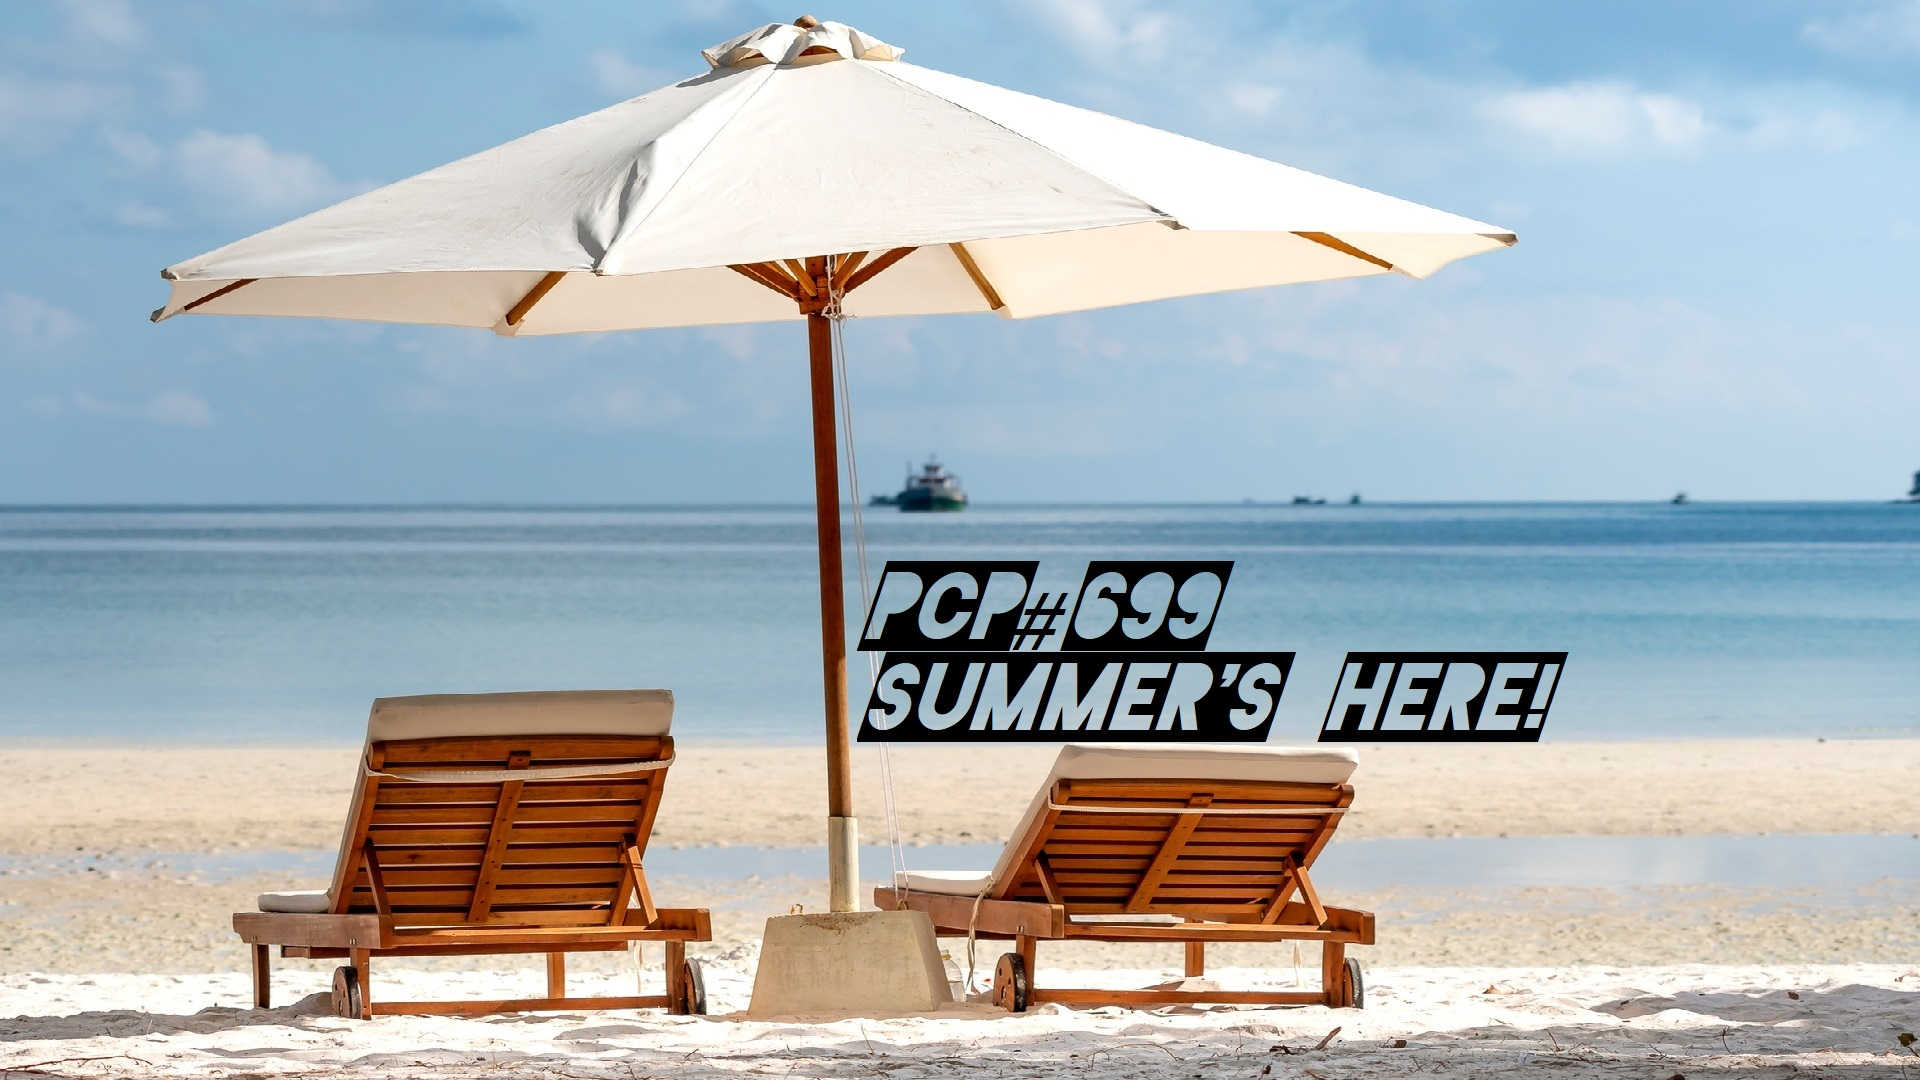 PCP#699... Summer's Here!.....